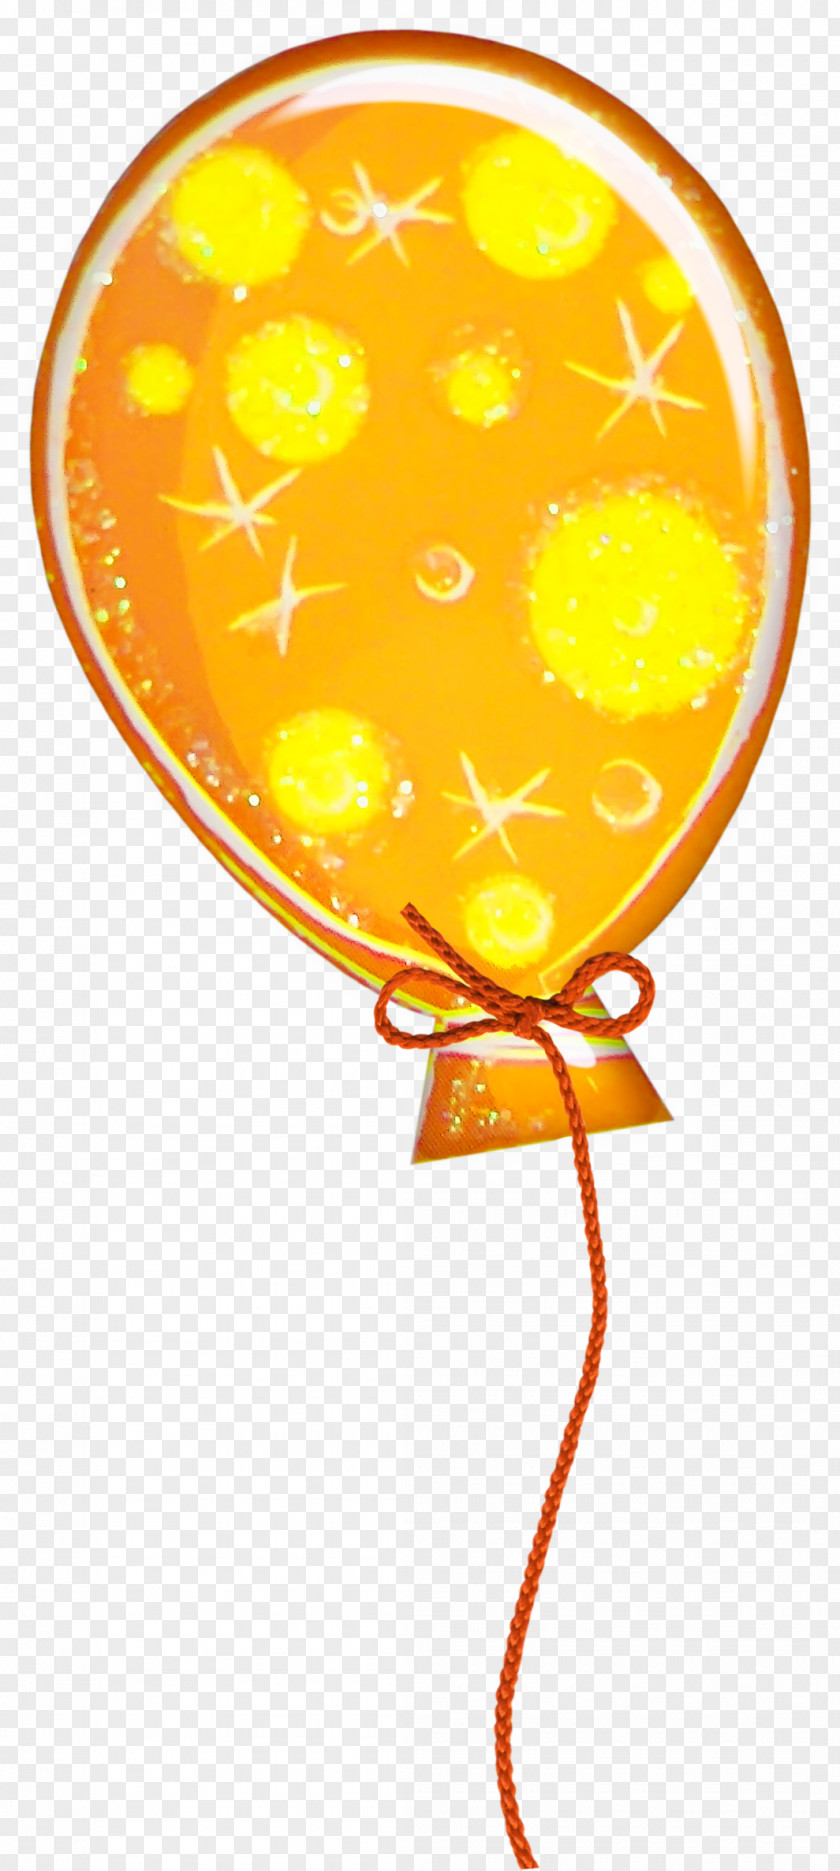 Balloon Toy Drawing Birthday PNG